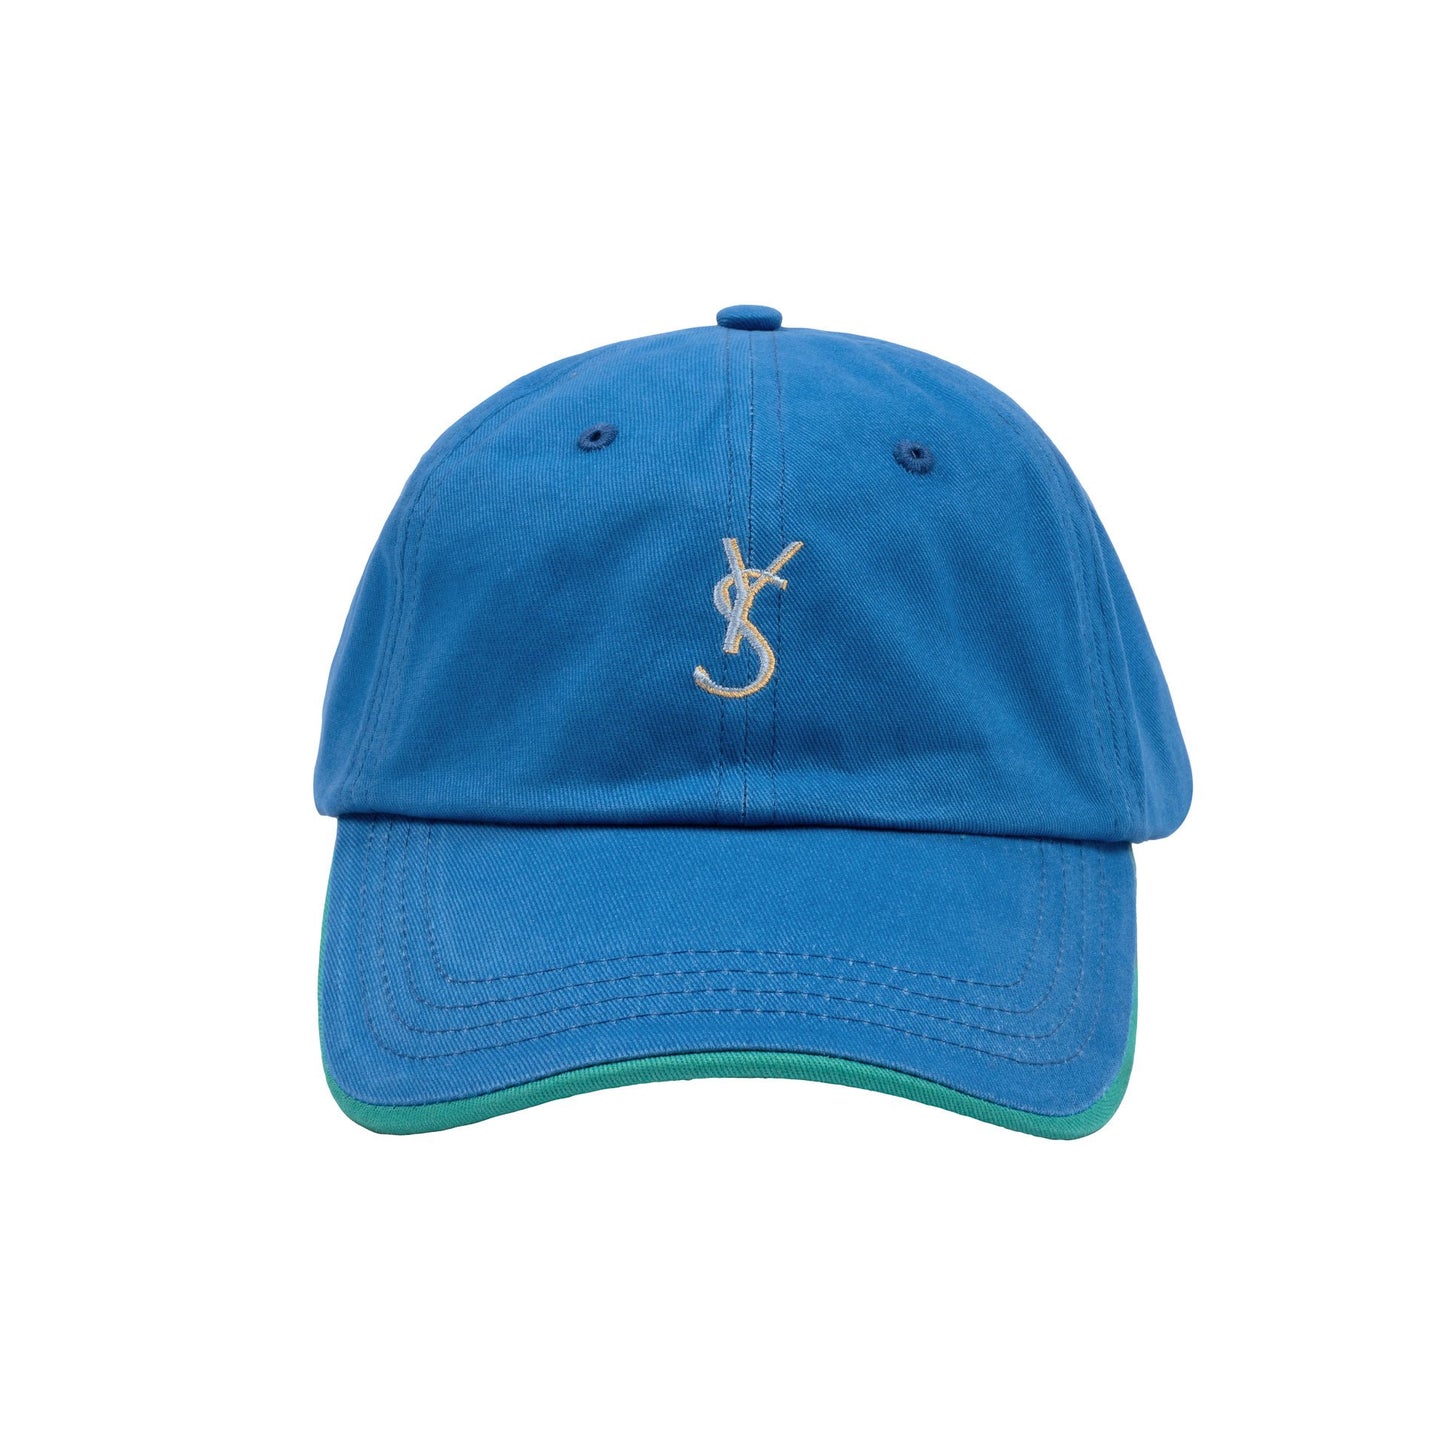 Two Tone Cap (Blue/Teal)